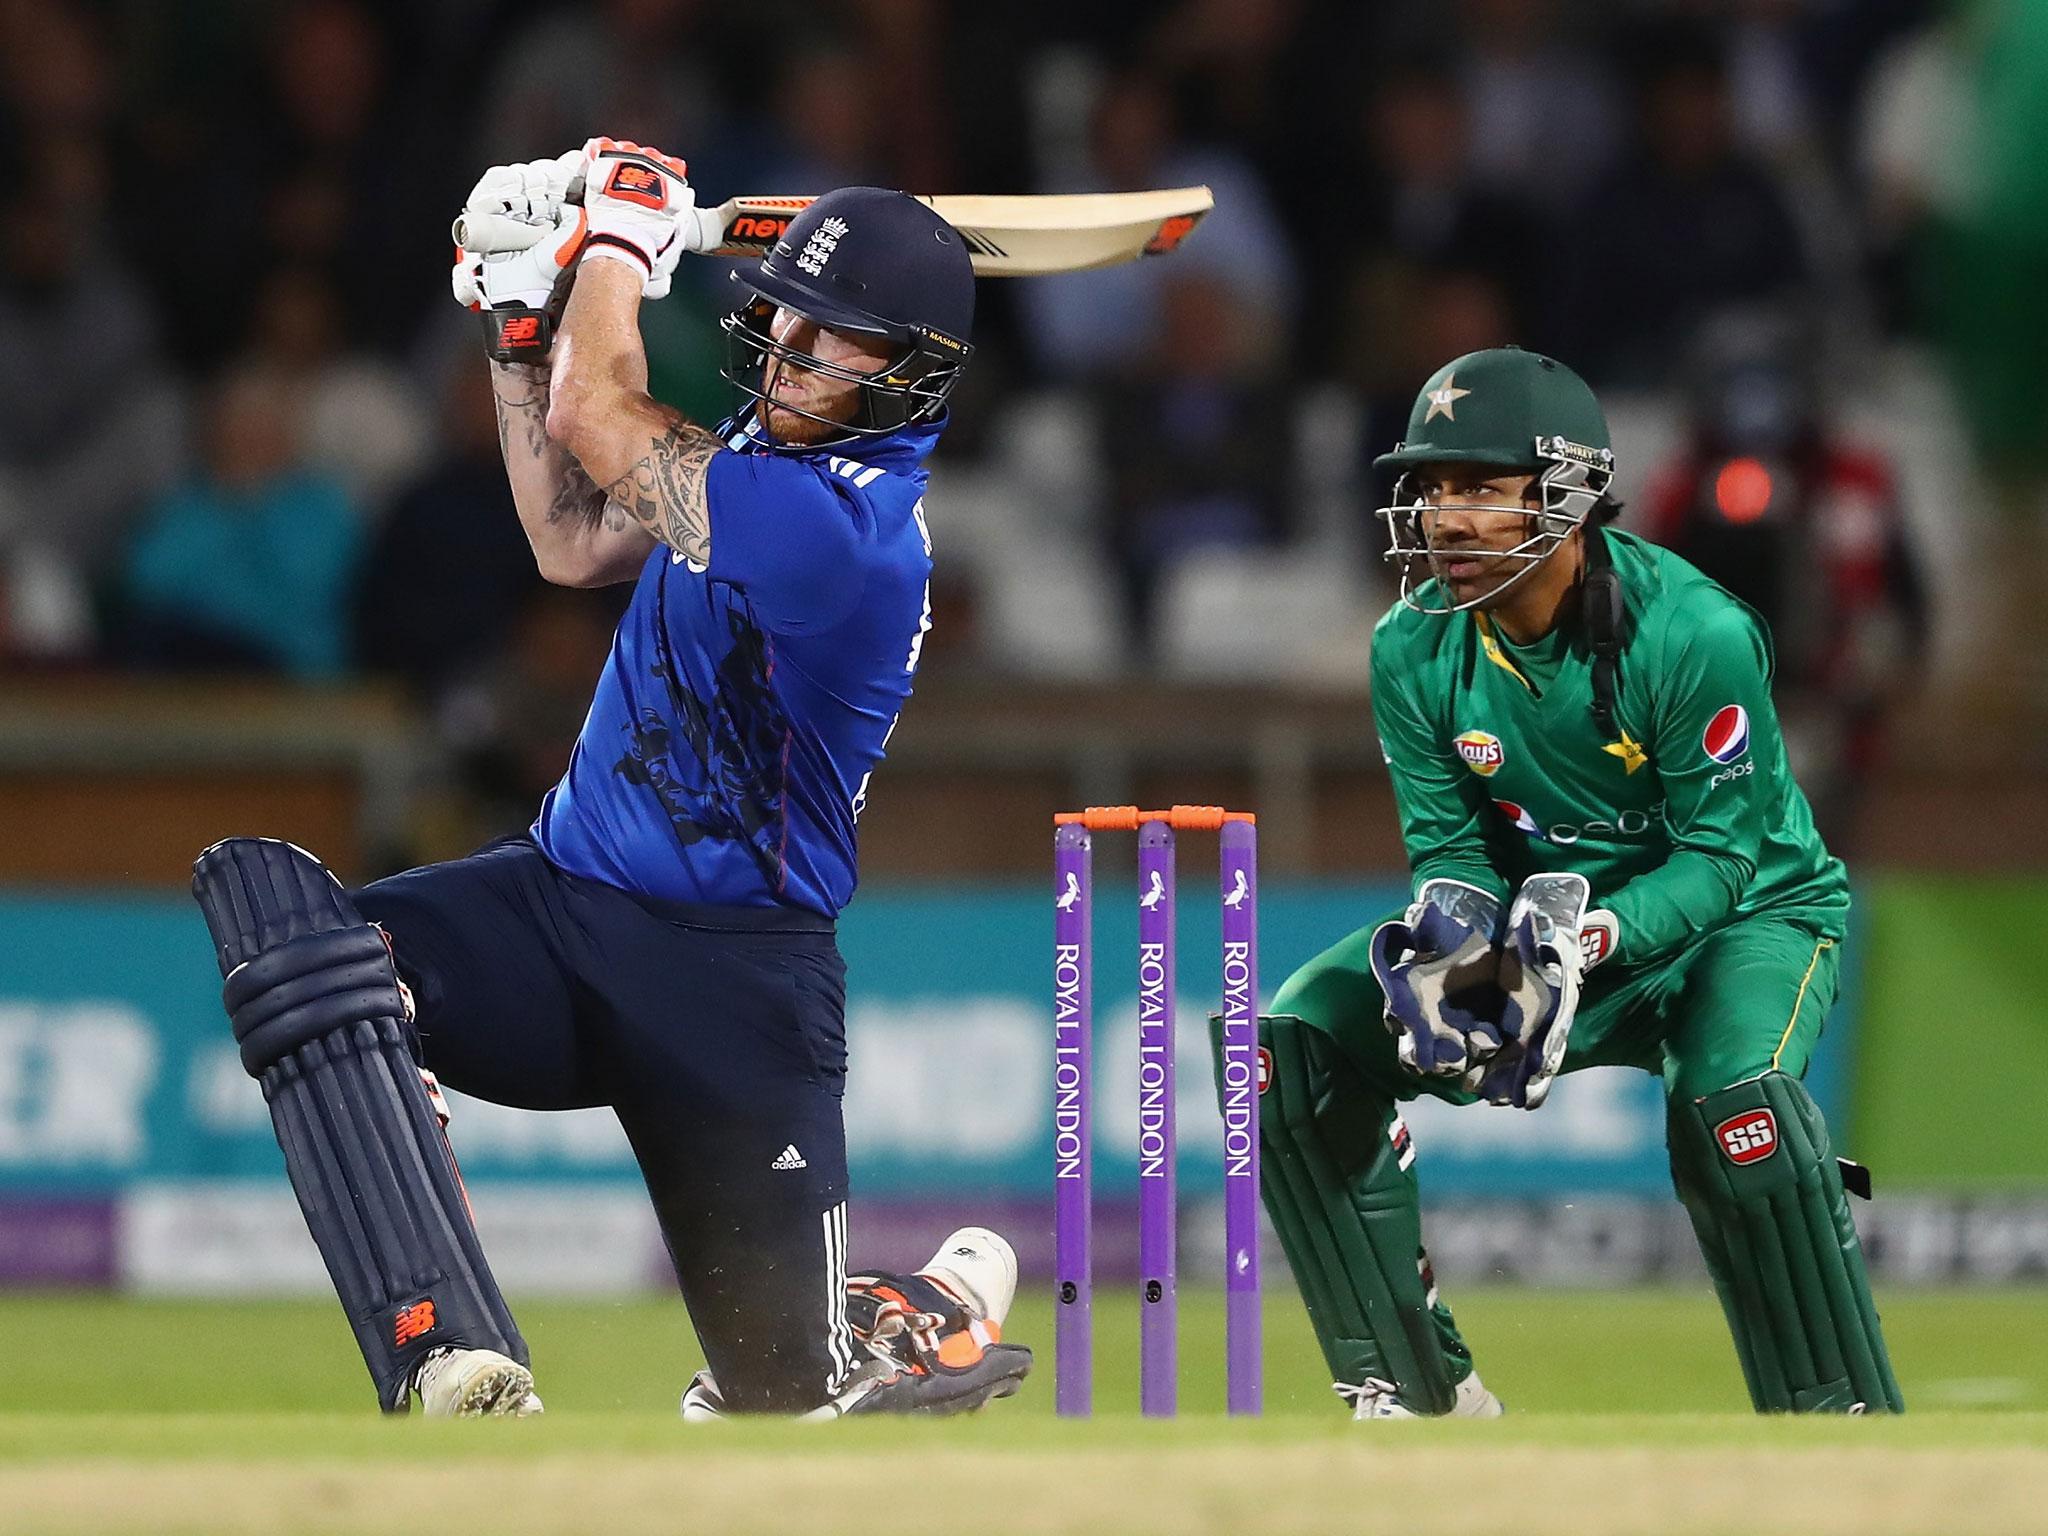 The likes of Ben Stokes are wonderful role models for young cricketers believes Nasser Hussain (Getty Images)